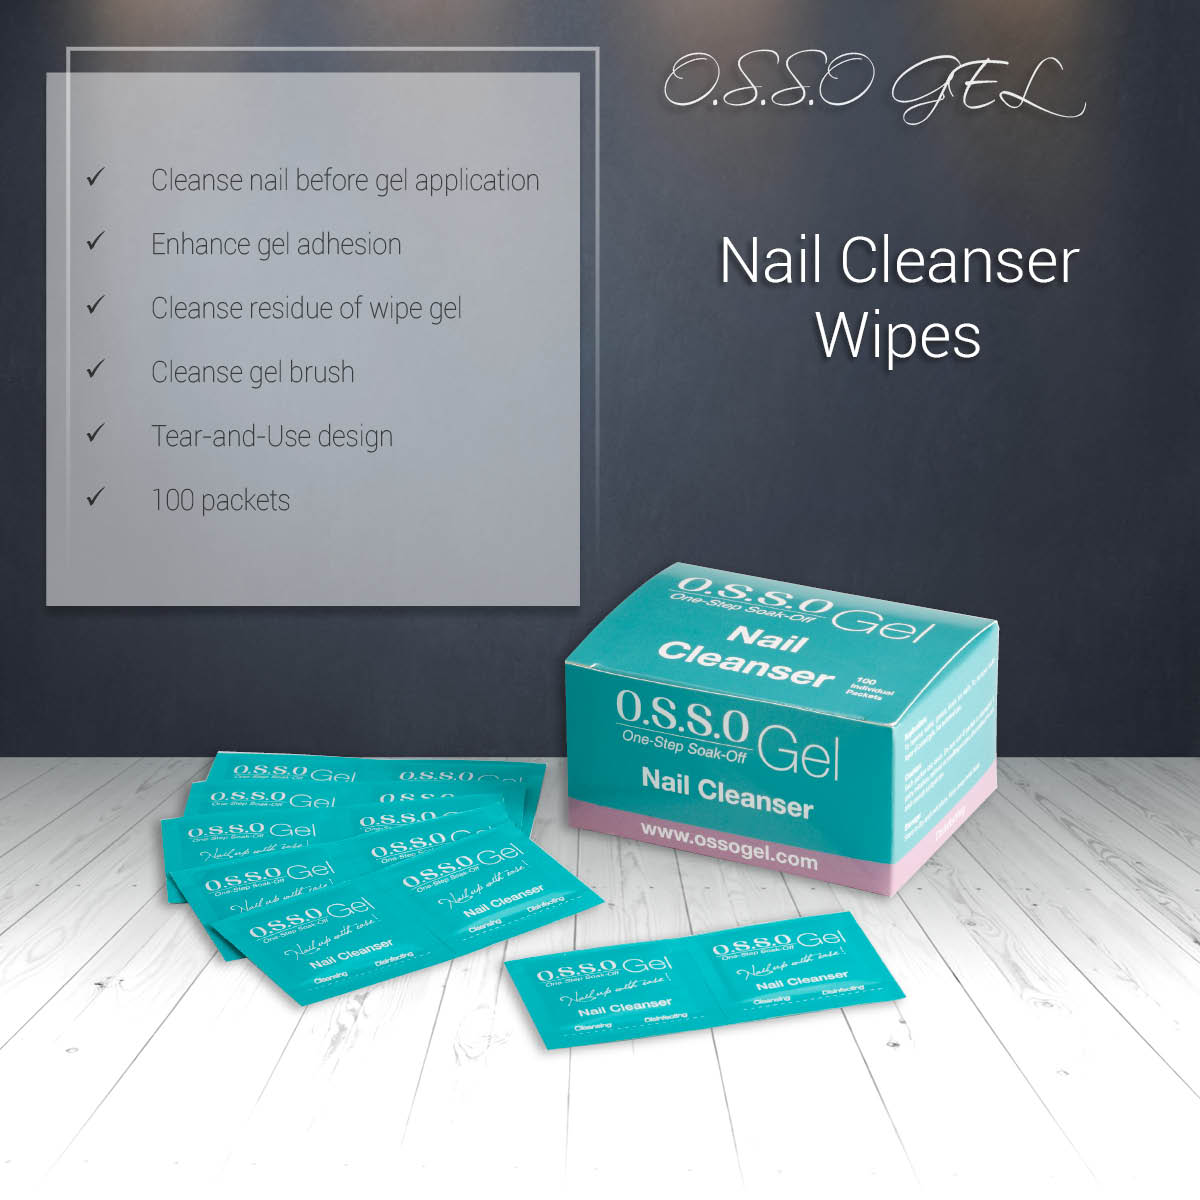 Nail Cleanser Wipes